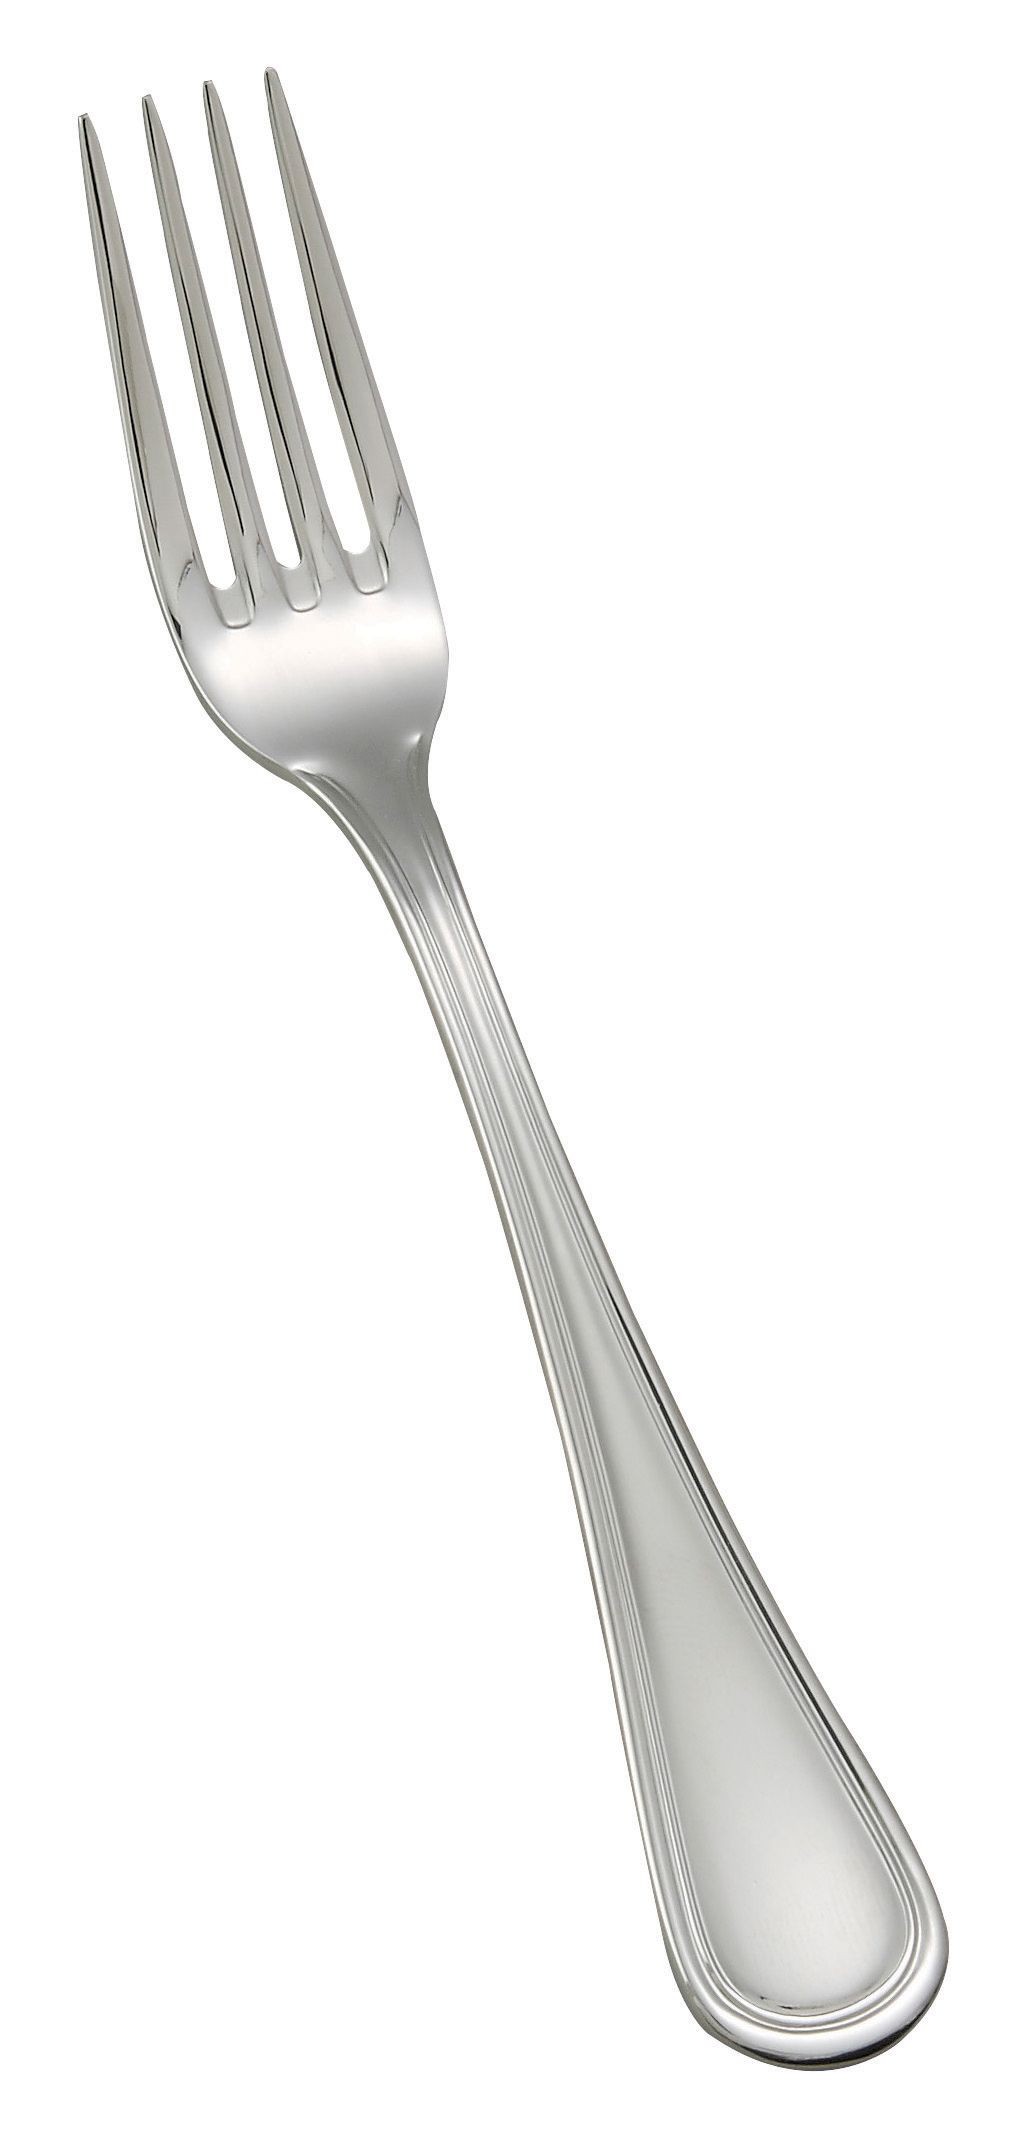 Winco 0030-06 Shangarila Extra Heavy Stainless Steel Salad Fork (12/Pack)